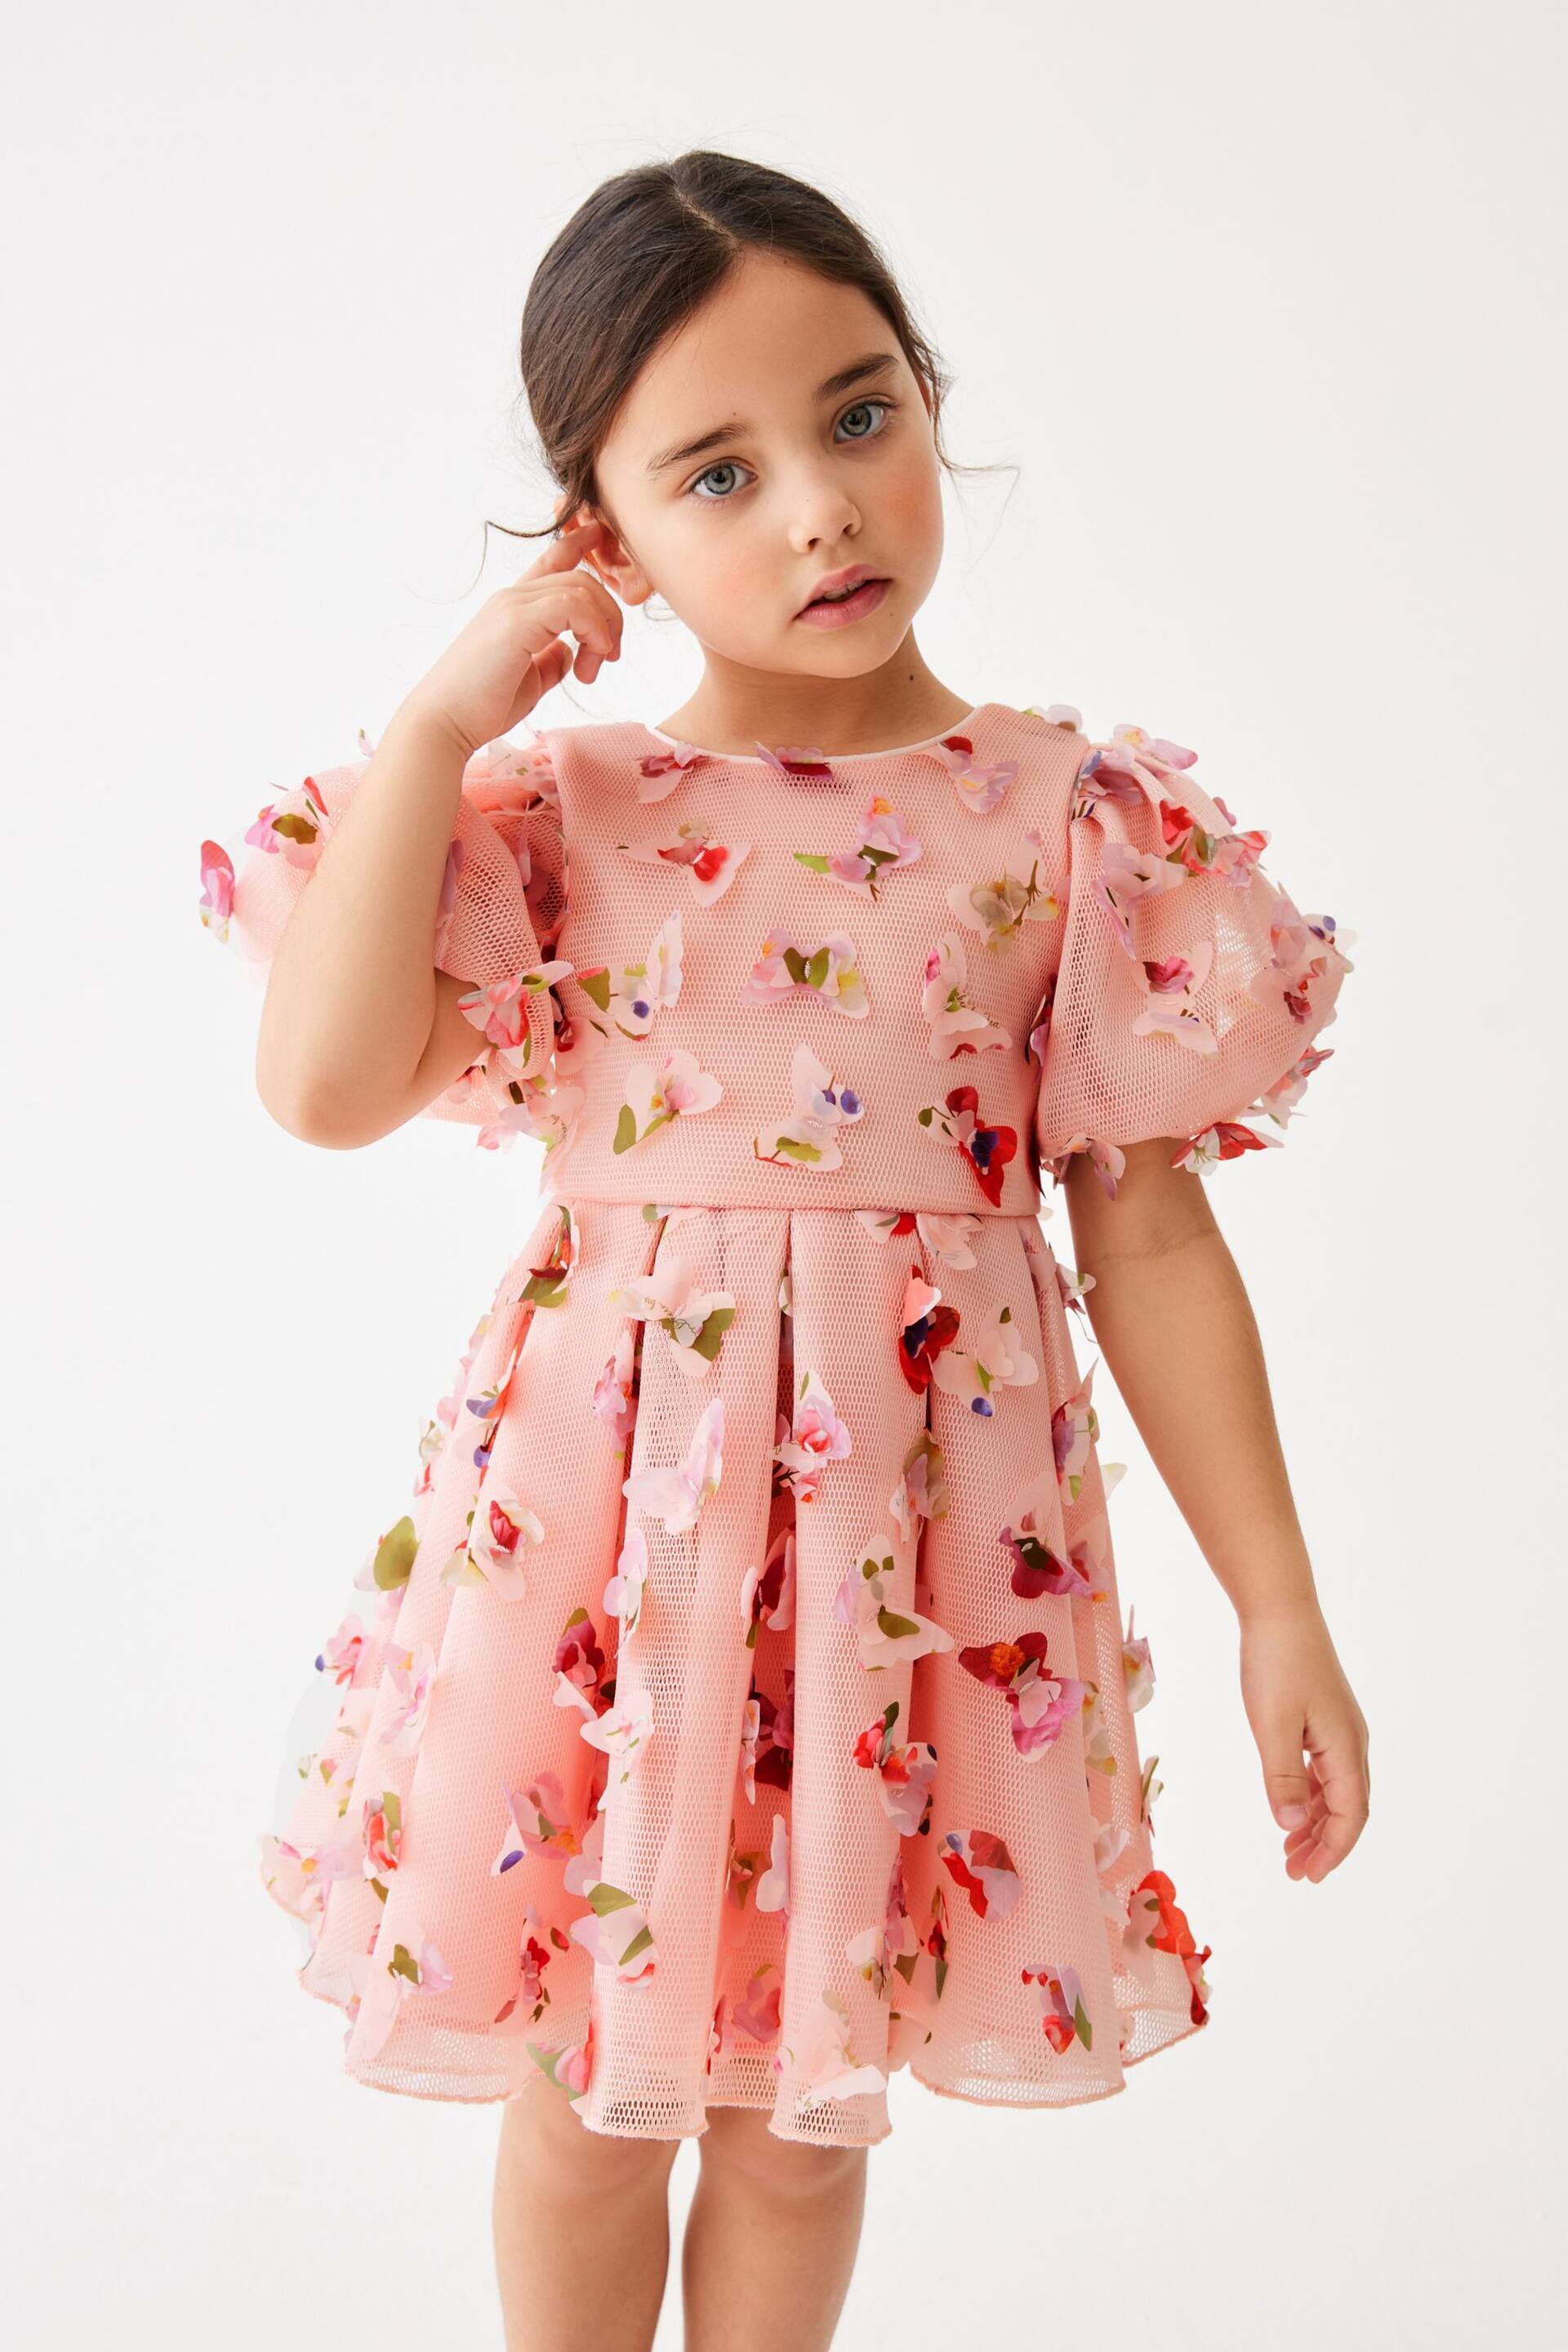 Baker by Ted Baker Pink 3D Butterfly Dress - Image 1 of 10